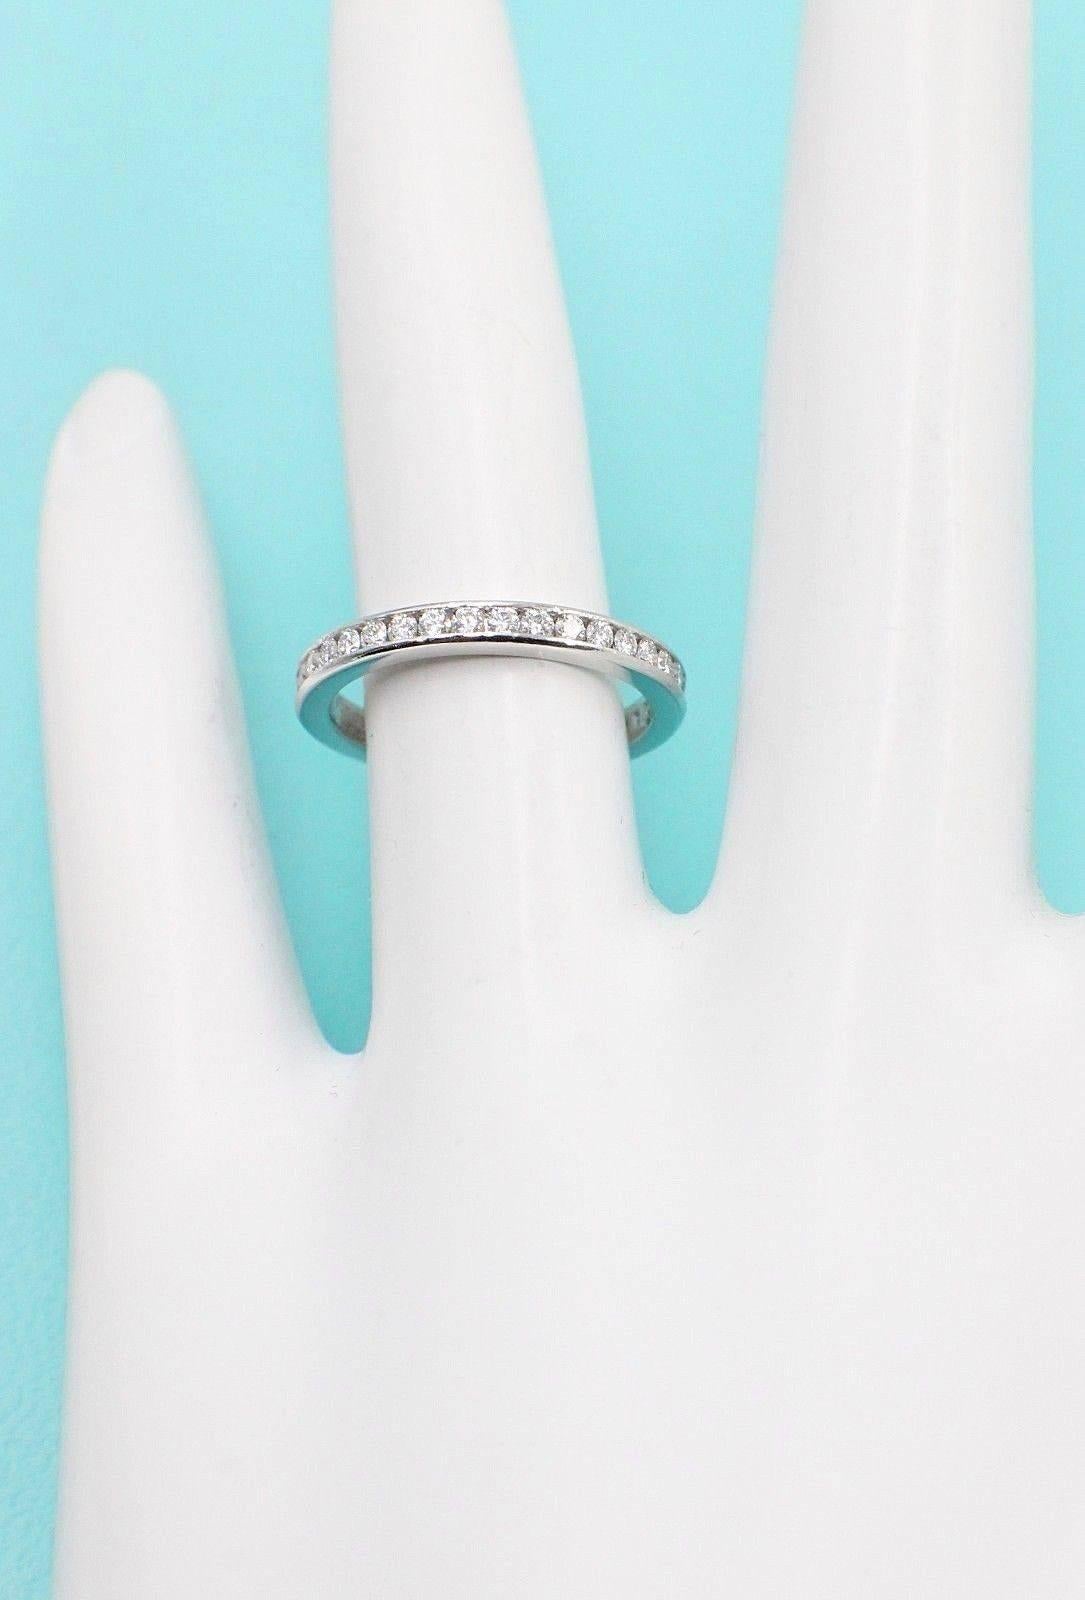 Tiffany & Co. Round Diamond Full Circle Wedding Band Ring Platinum In Excellent Condition For Sale In San Diego, CA